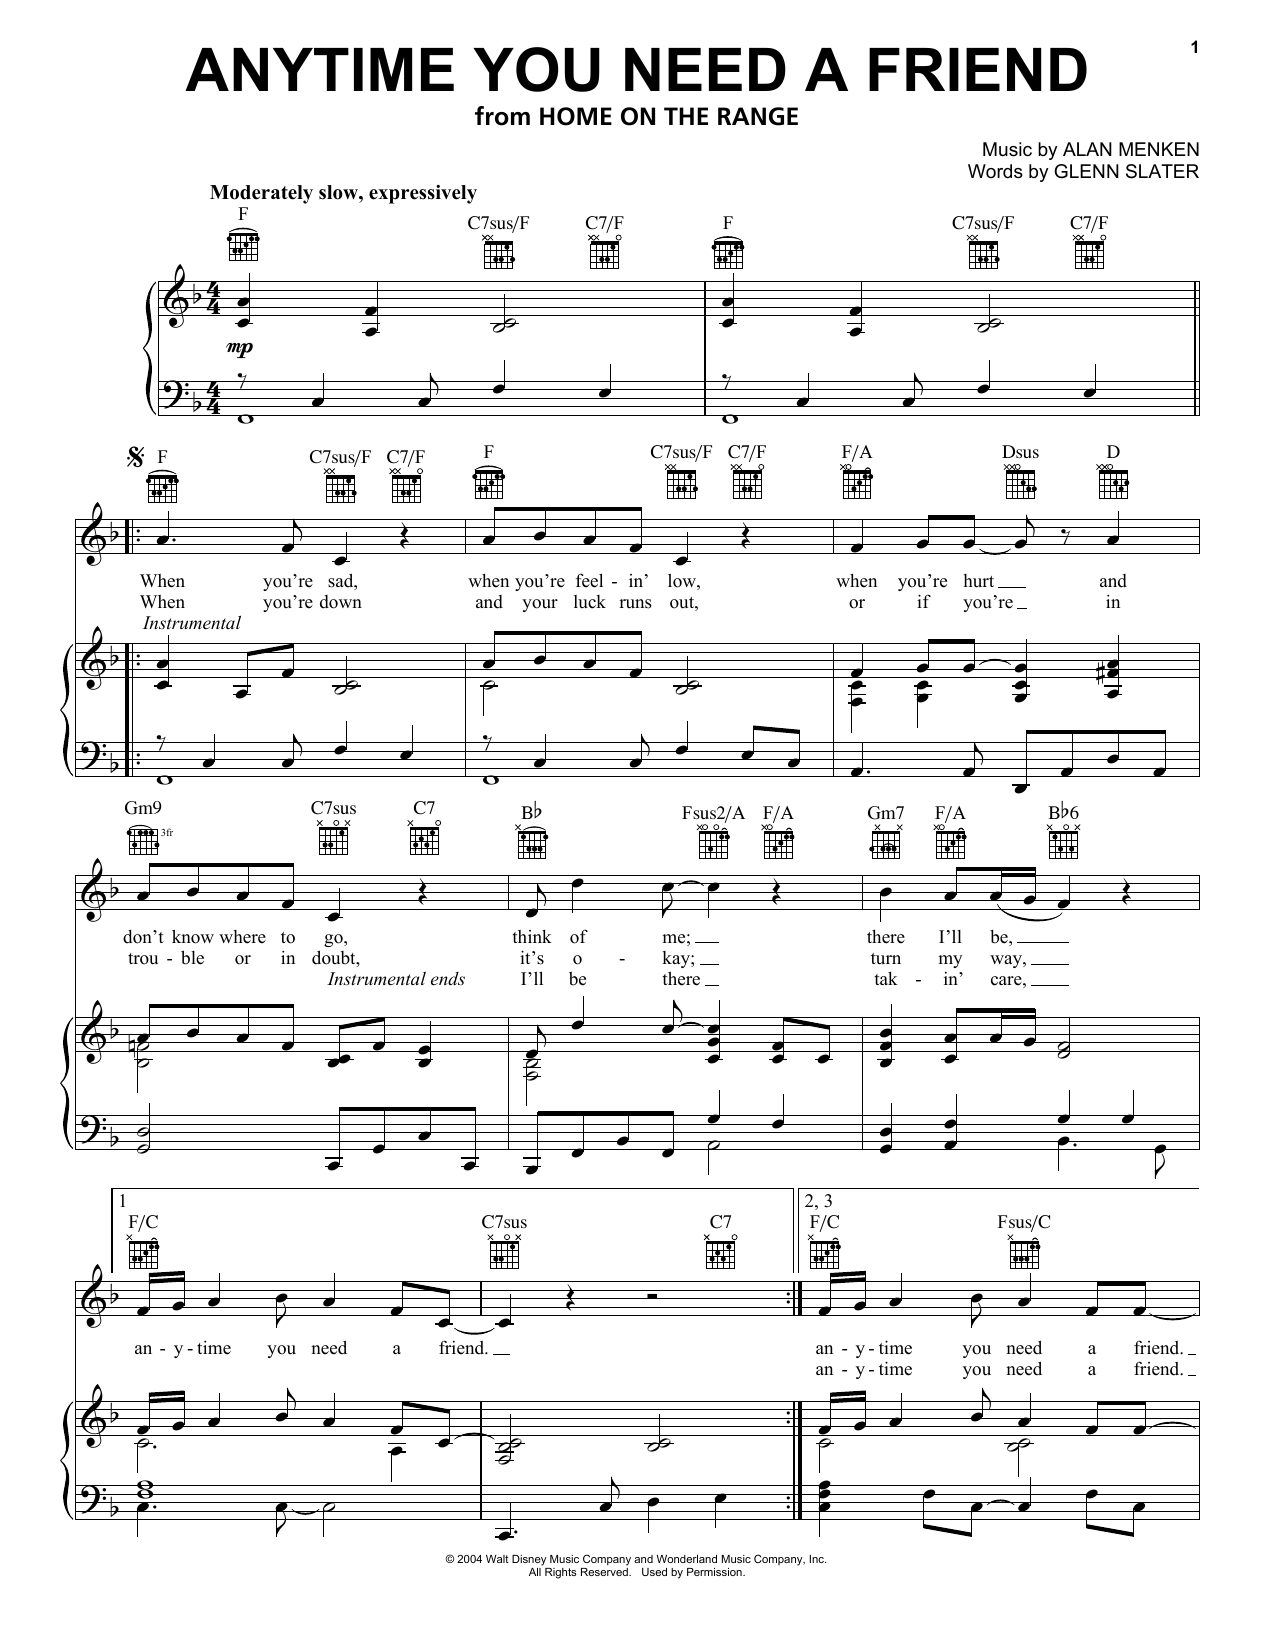 The Beu Sisters Anytime You Need A Friend sheet music notes and chords. Download Printable PDF.